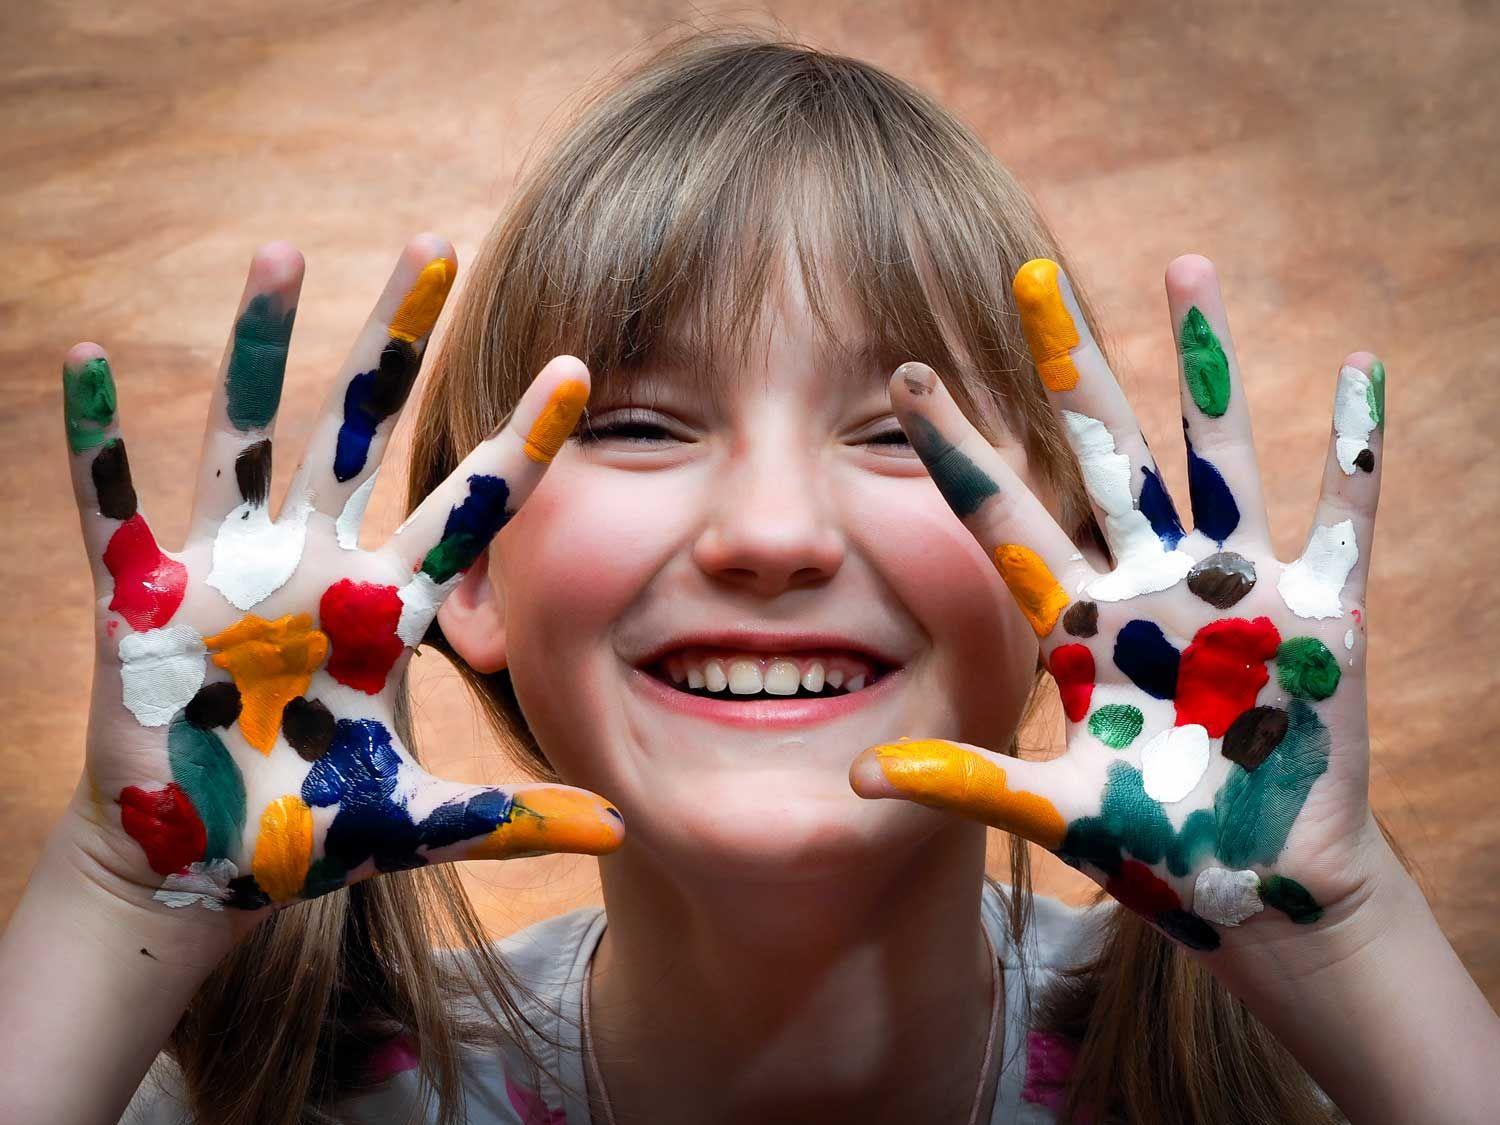 Little girl with color on her hands